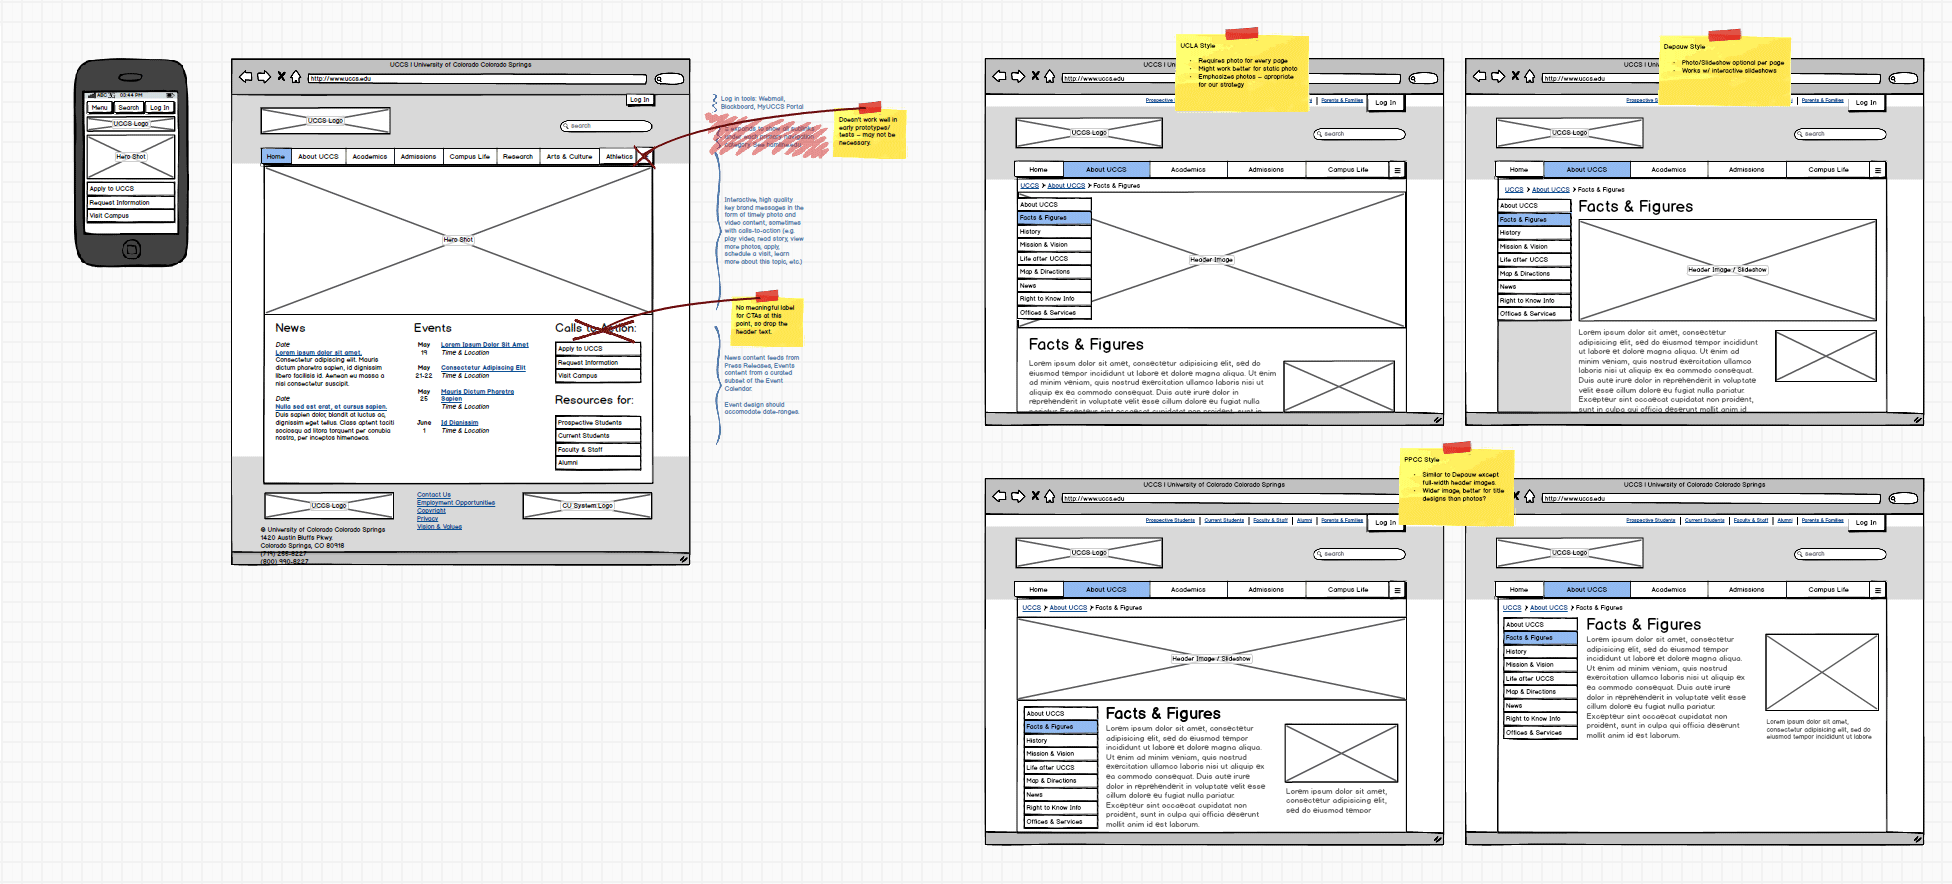 Early wireframes